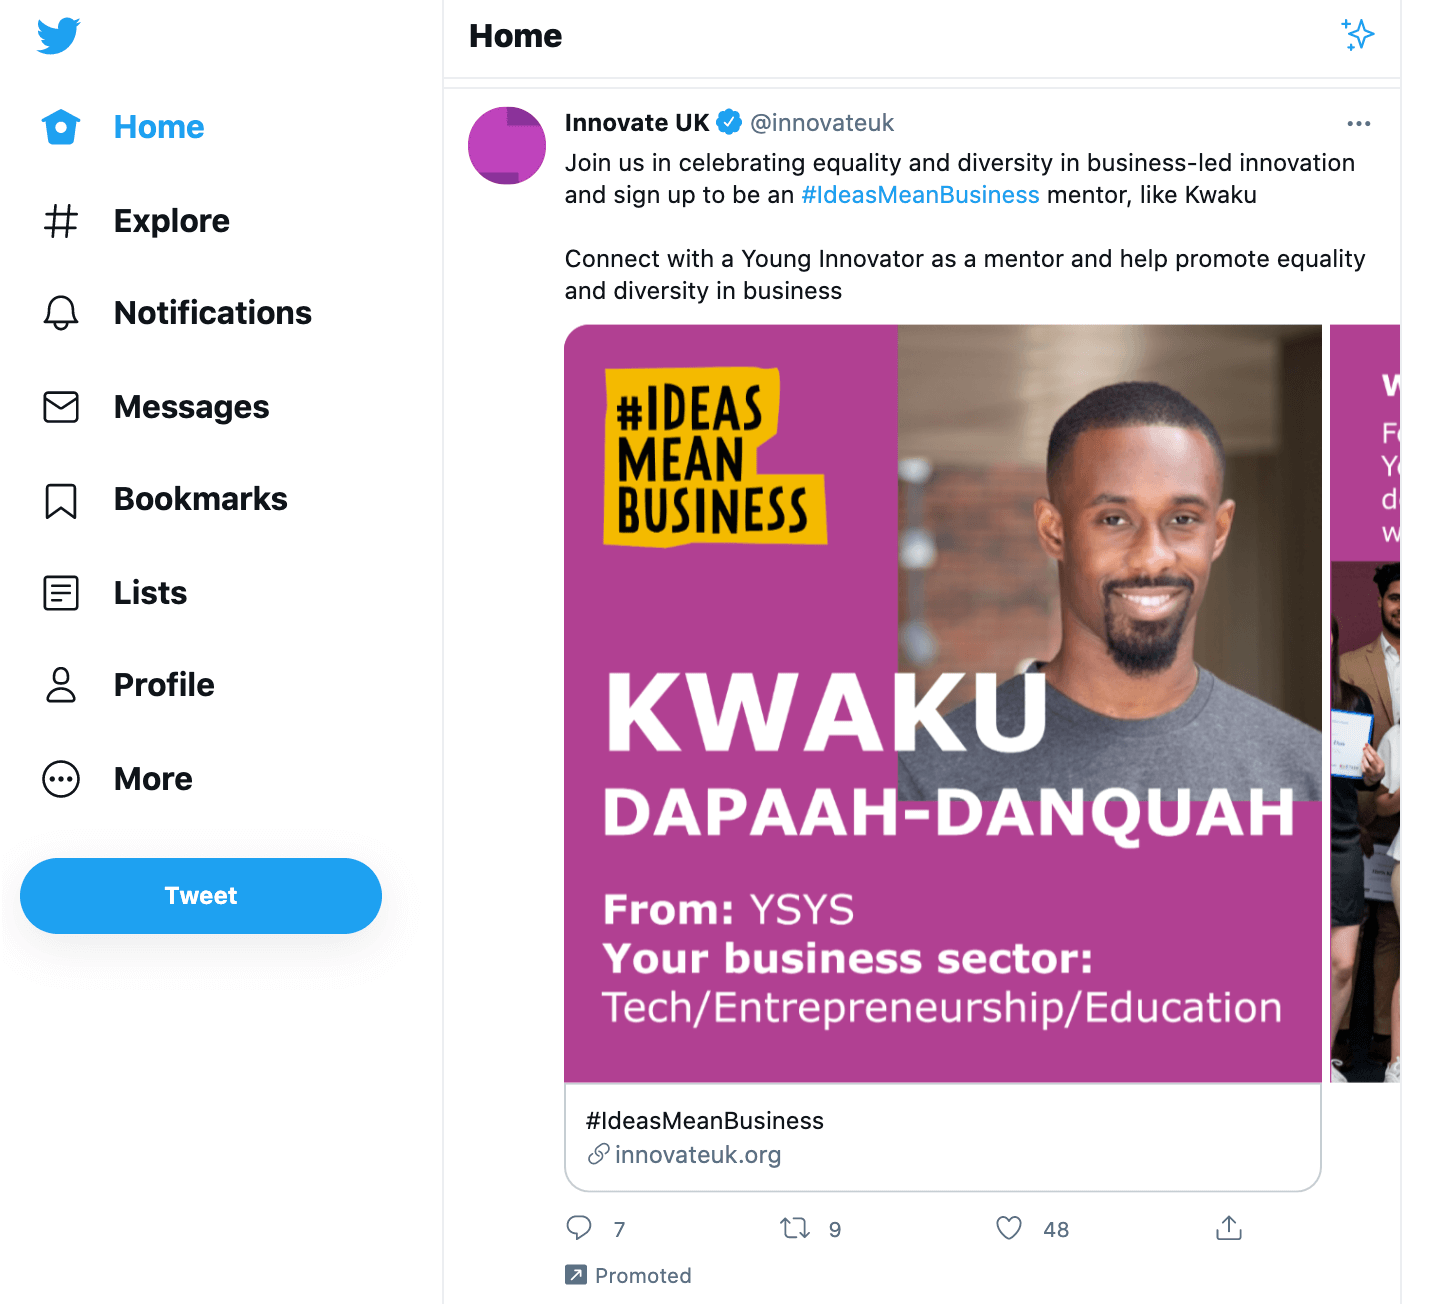 A promoted Twitter ad campaign tweet.